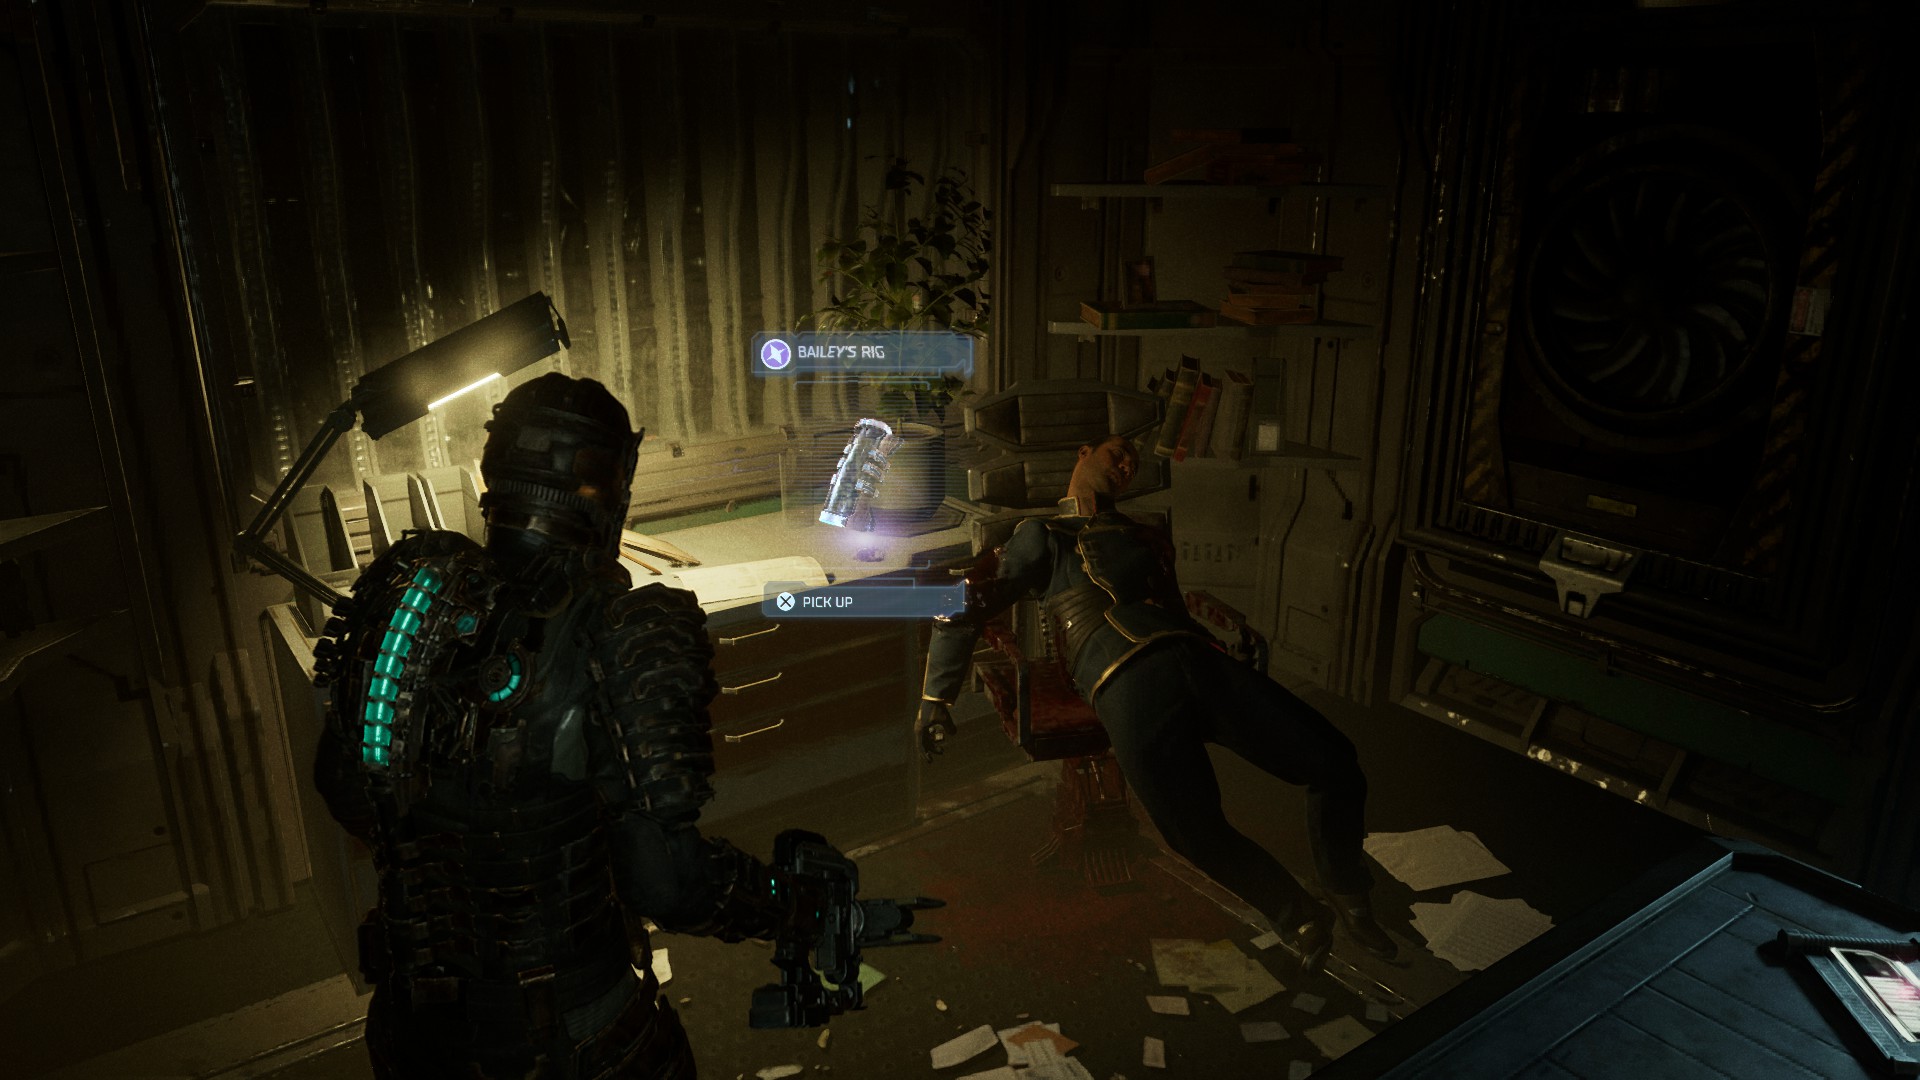 Dead Space Security Clearance - Bailey's rig to get Master Override